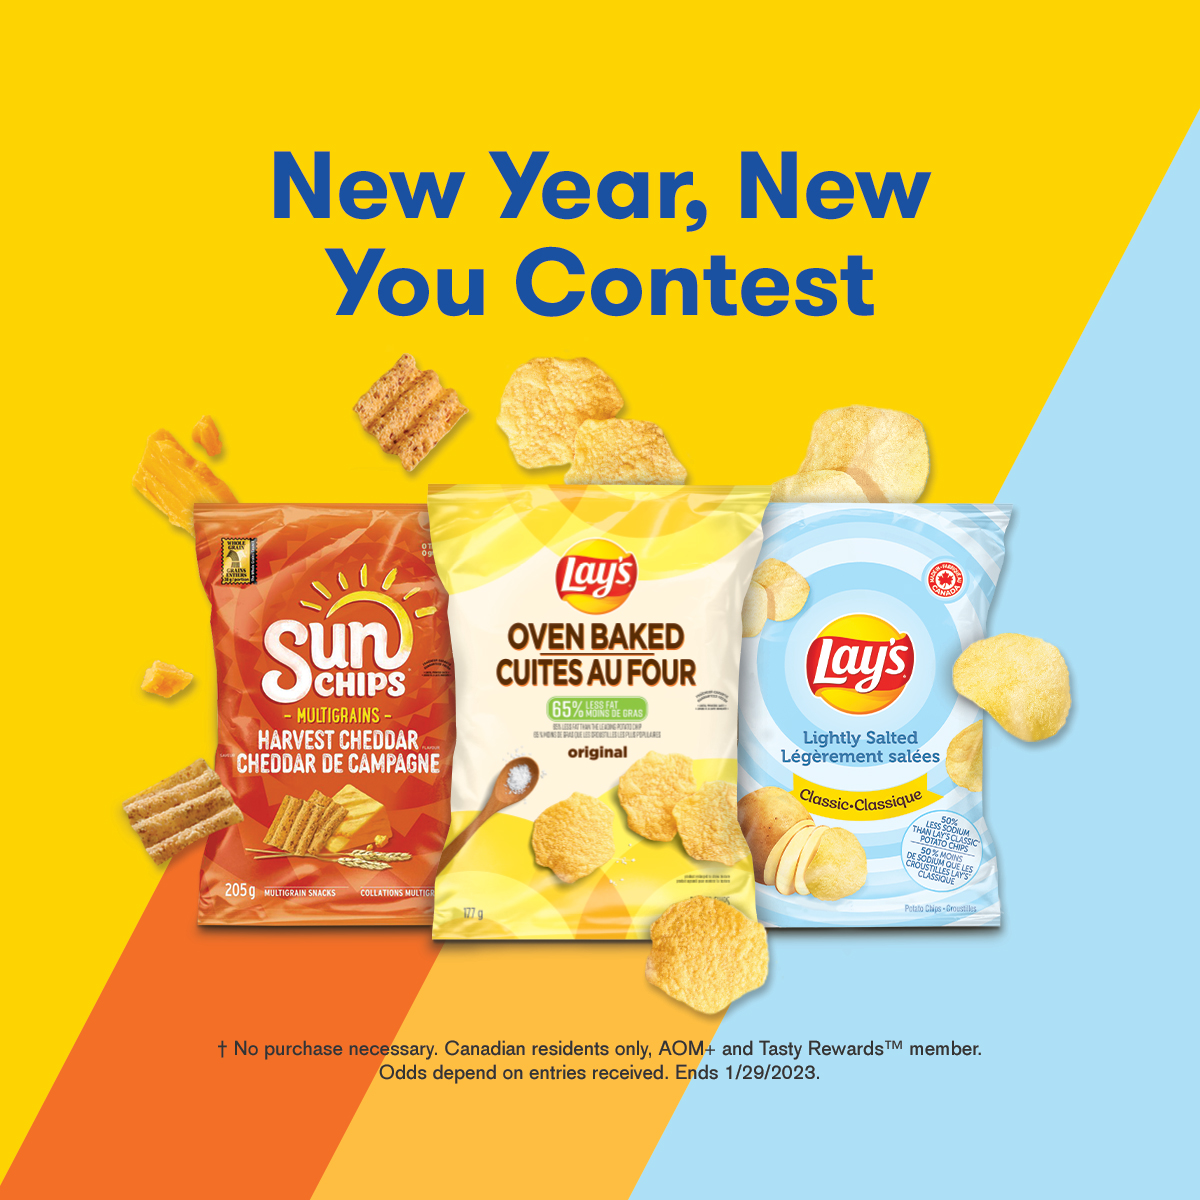 New Year, New You Contest